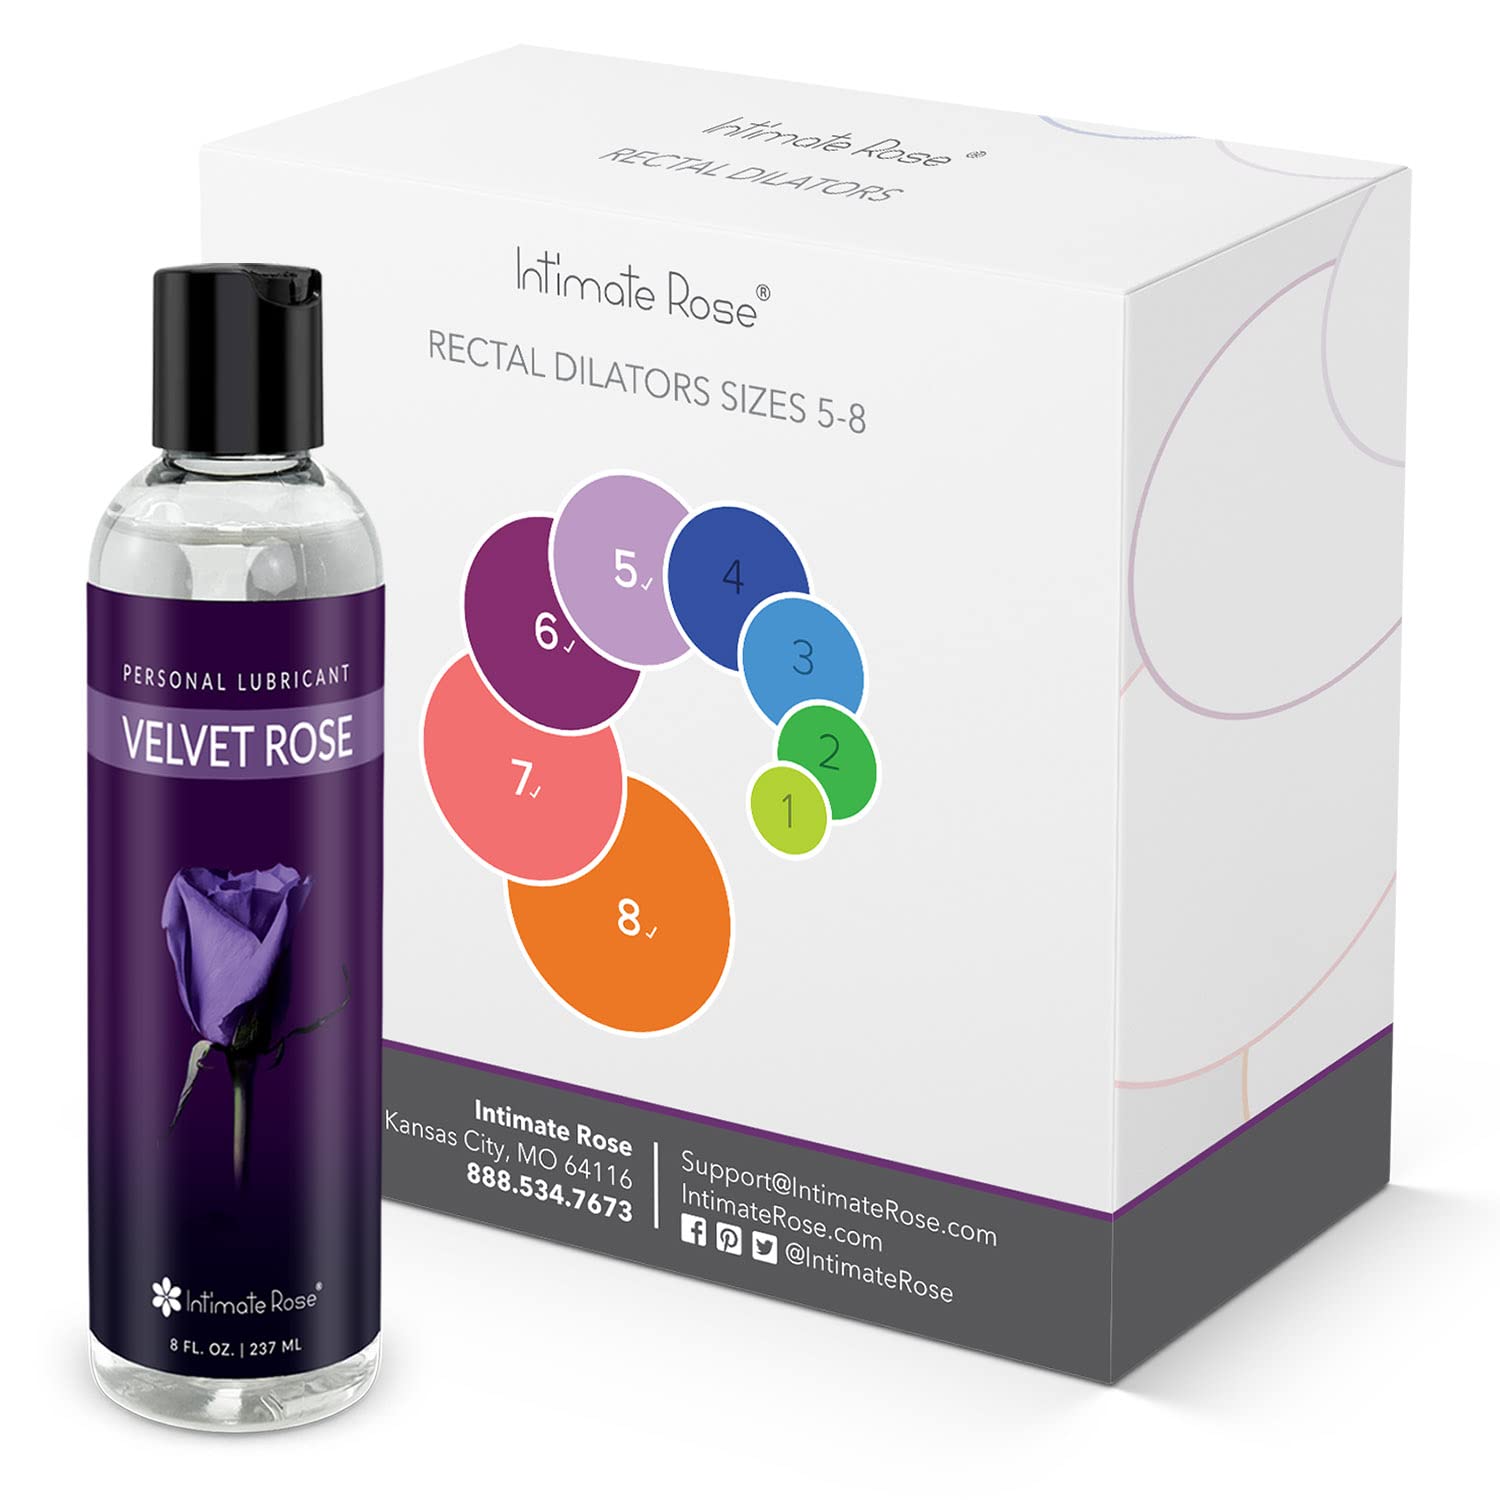 Save 10% on Intimate Rose 4-Pack Rectal Trainers - Size 5-8 & Velvet Rose Lubricant Bundle.